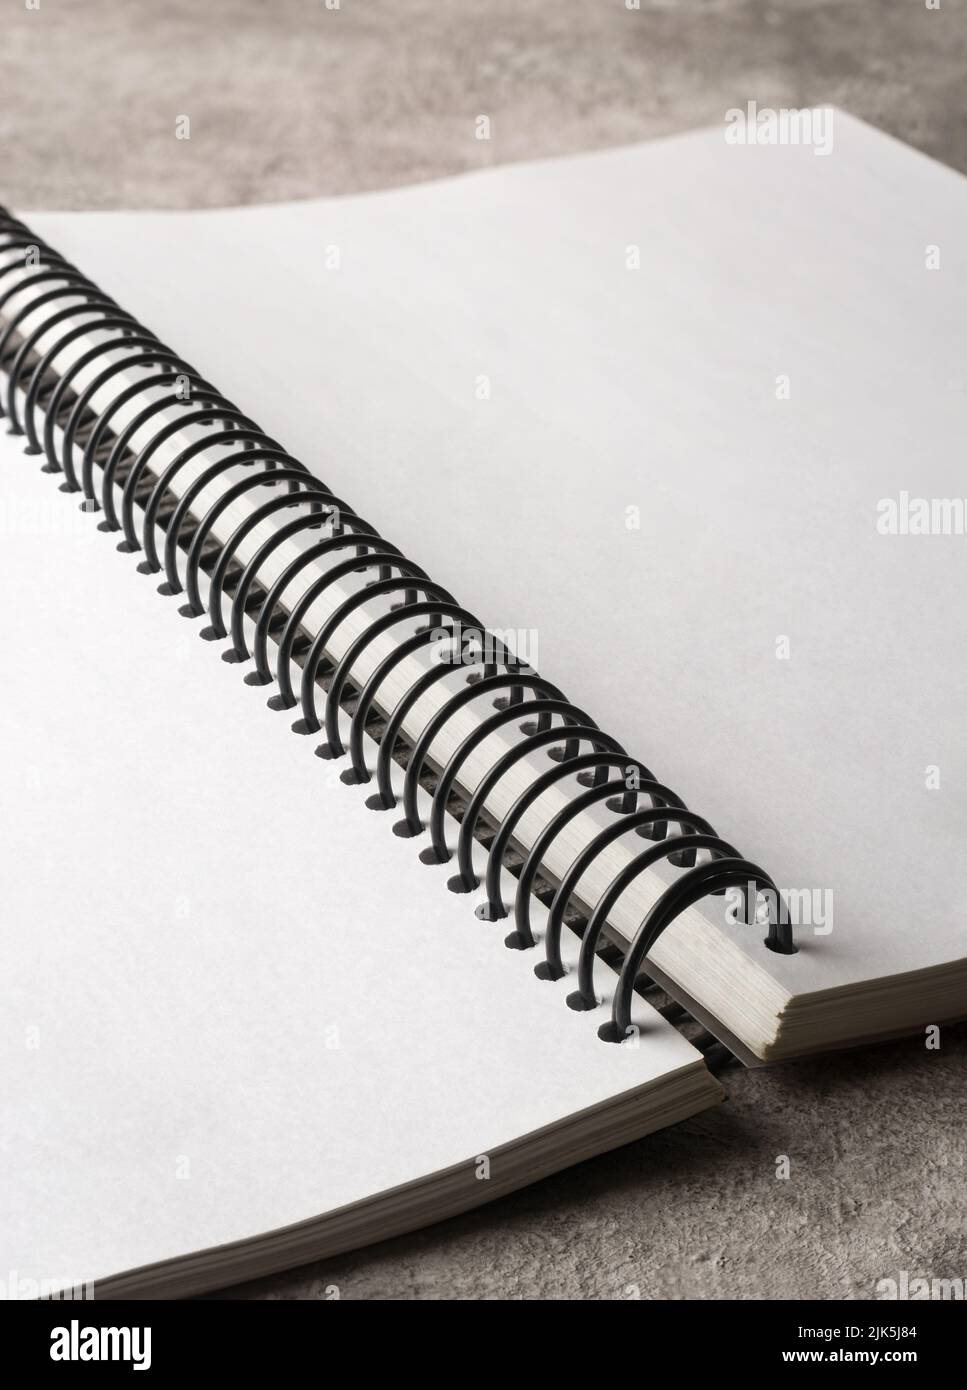 opened book with wire spiral binding on table top, blank and no line white pages, selective focus Stock Photo